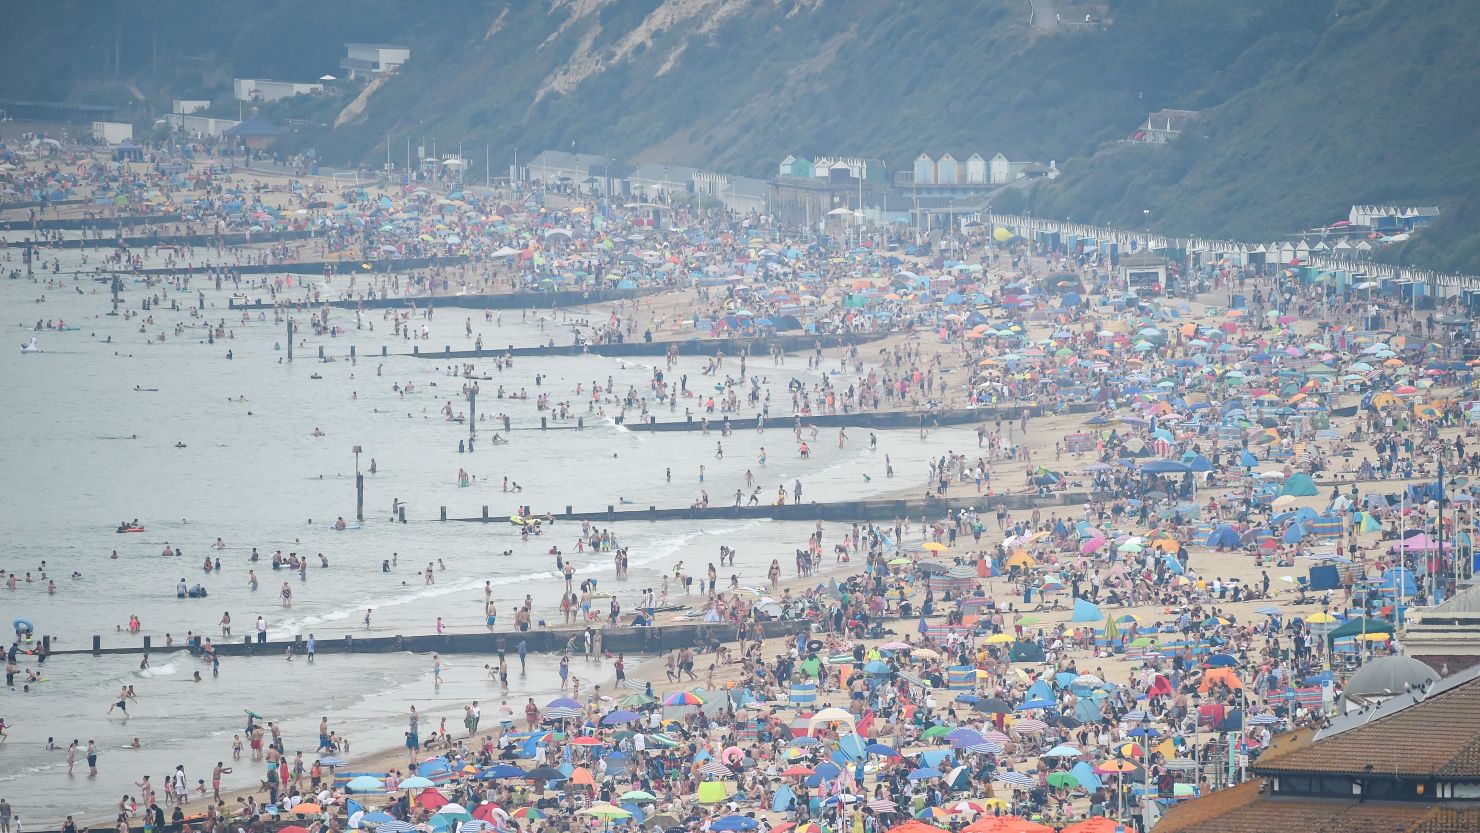 Last summer brought huge crowds to some of British beaches as a heatwave coincided with an end lockdown.